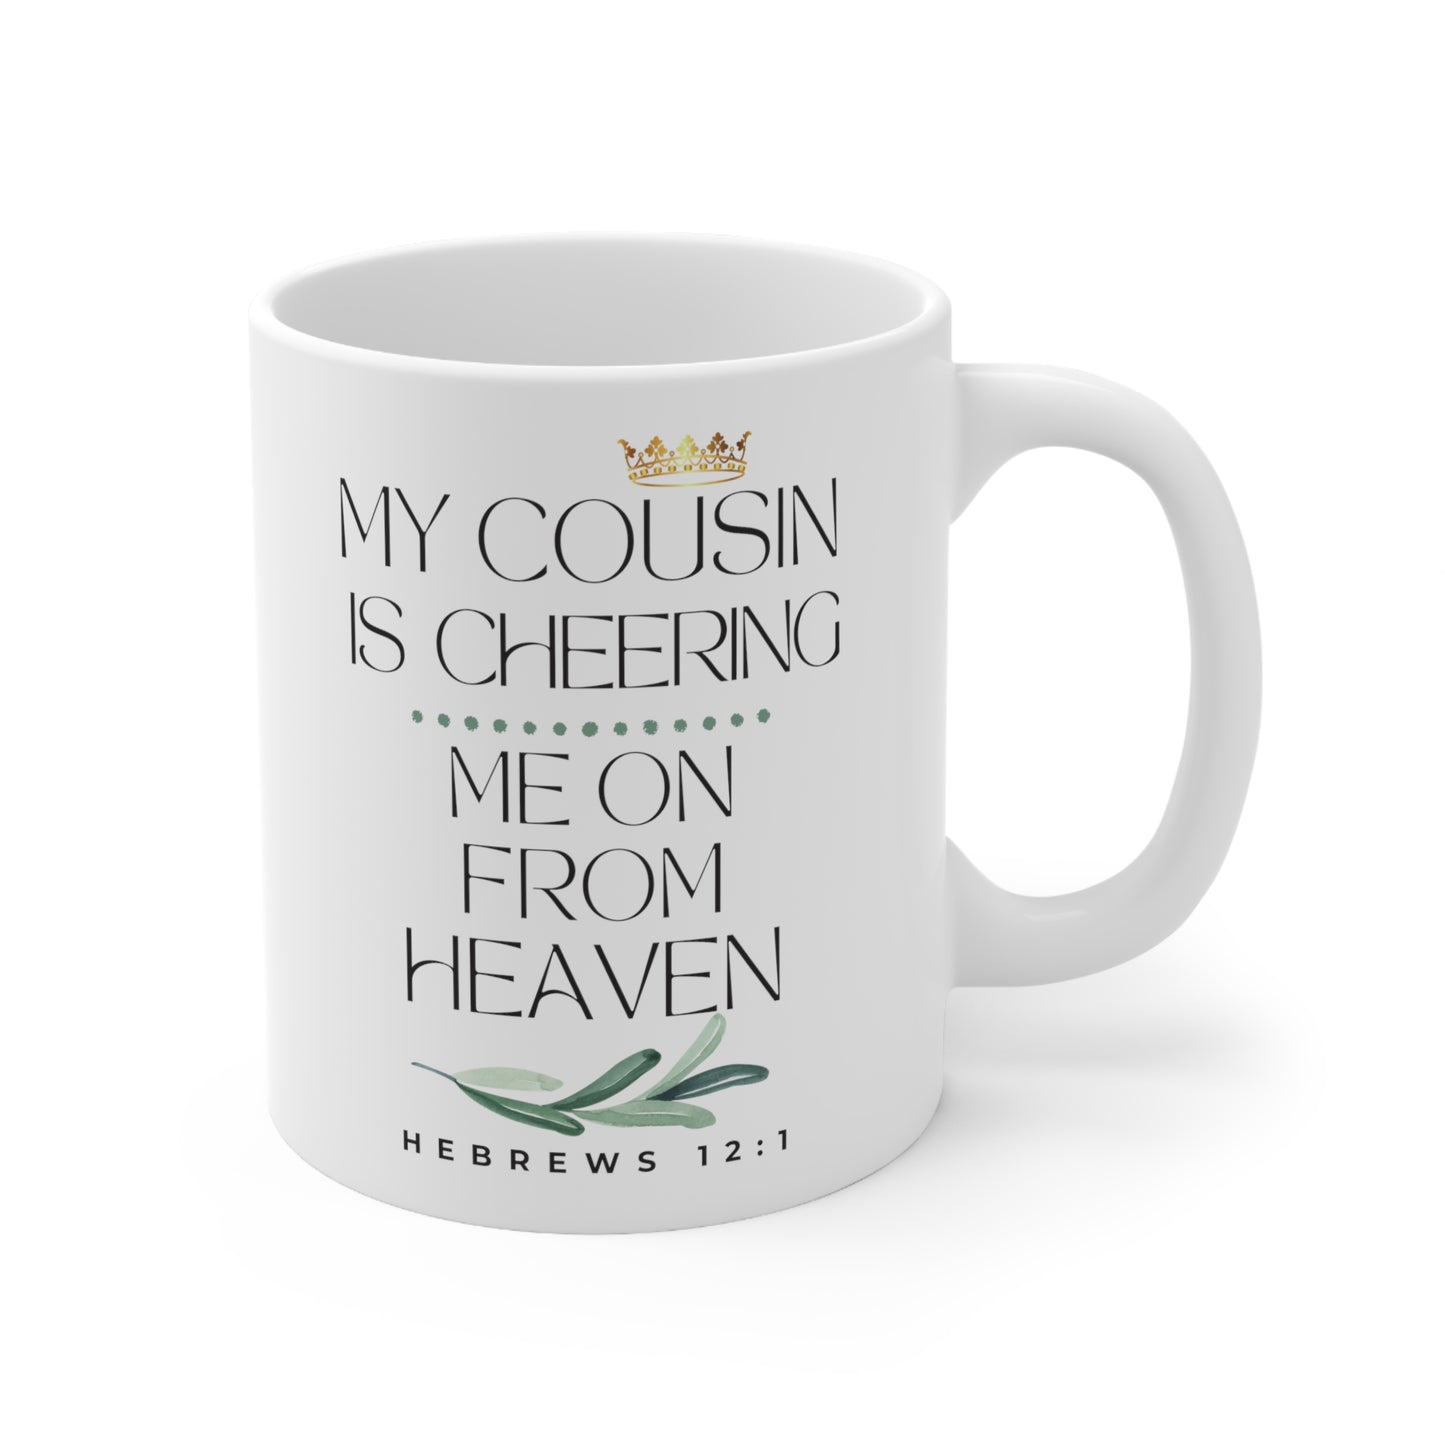 Cousin Memorial Gift Mug, Cheering Me on from Heaven